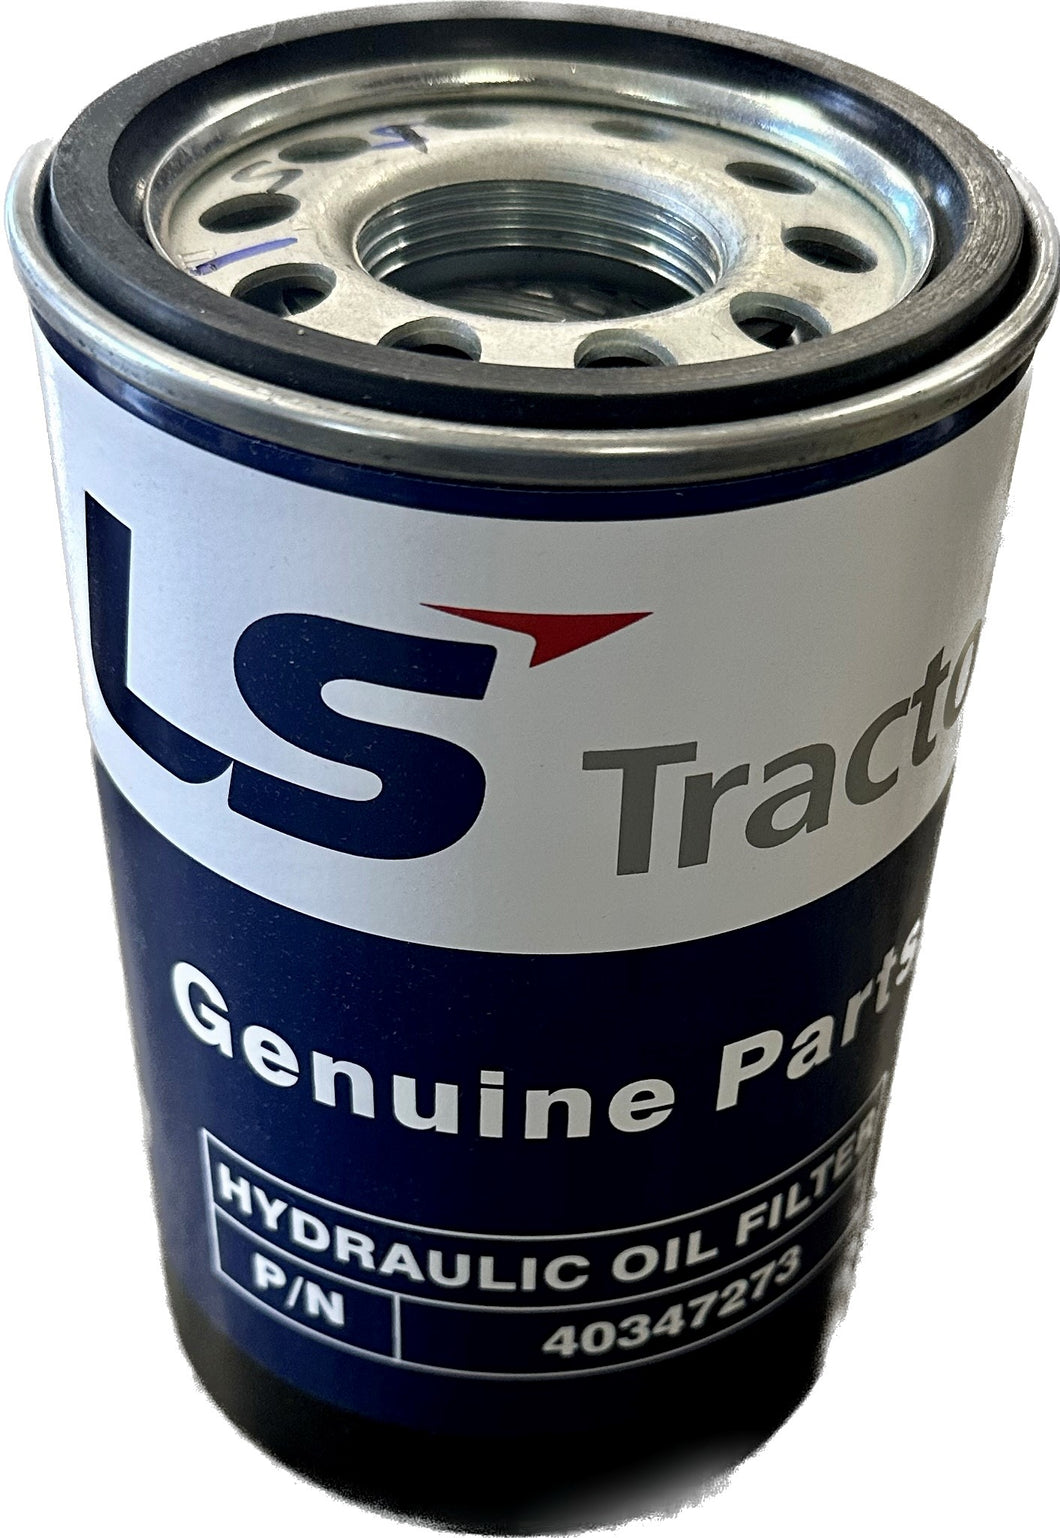 LS Tractor Hydrostatic Oil Filter TRG823 40347273